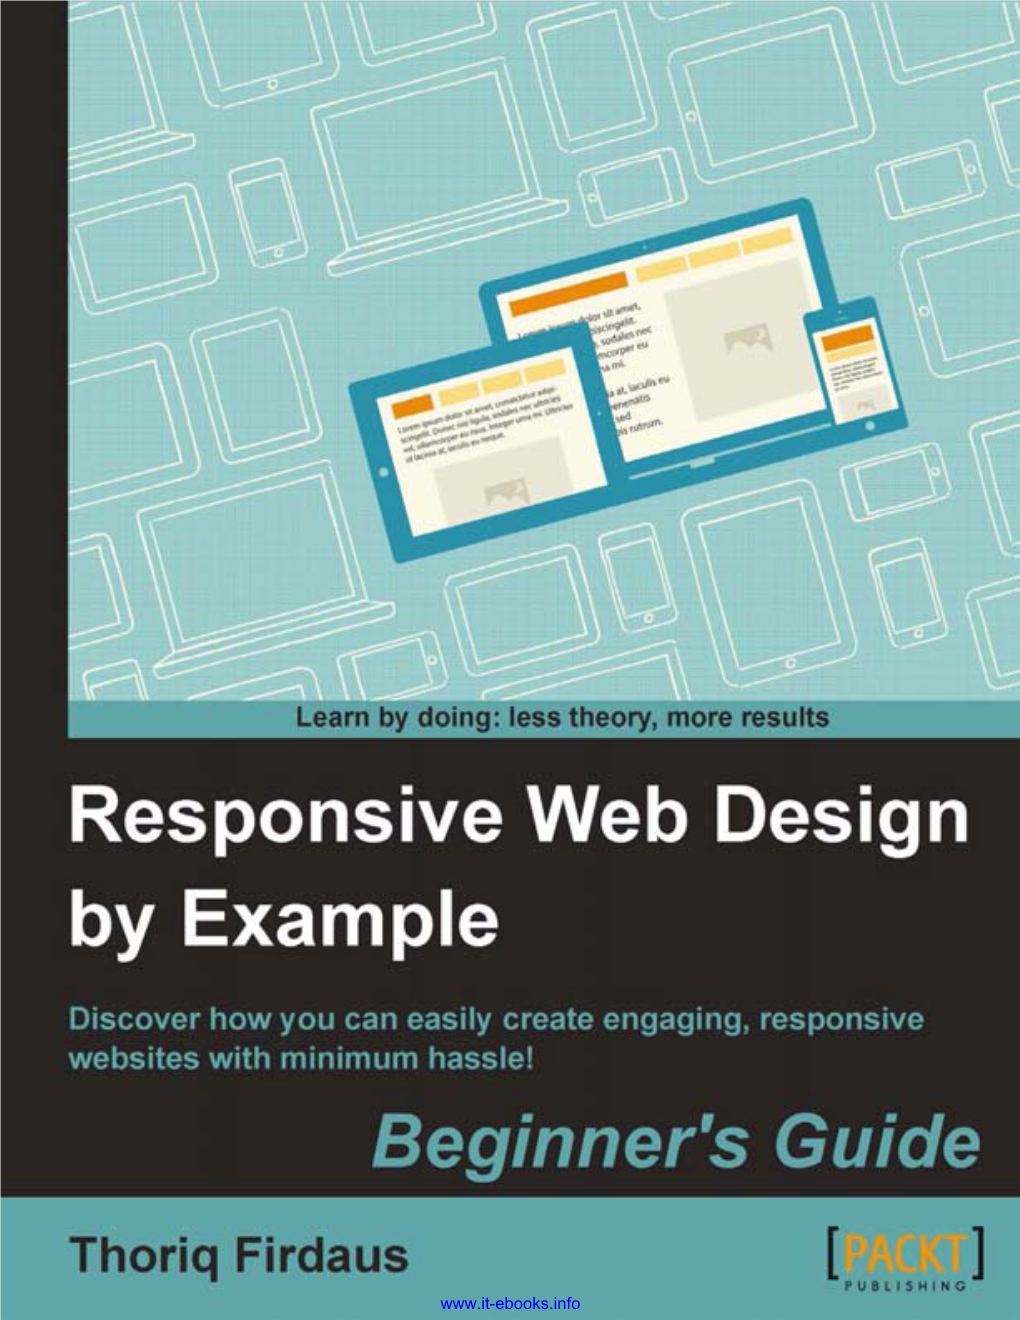 Thank You for Buying Responsive Web Design by Example Beginner's Guide